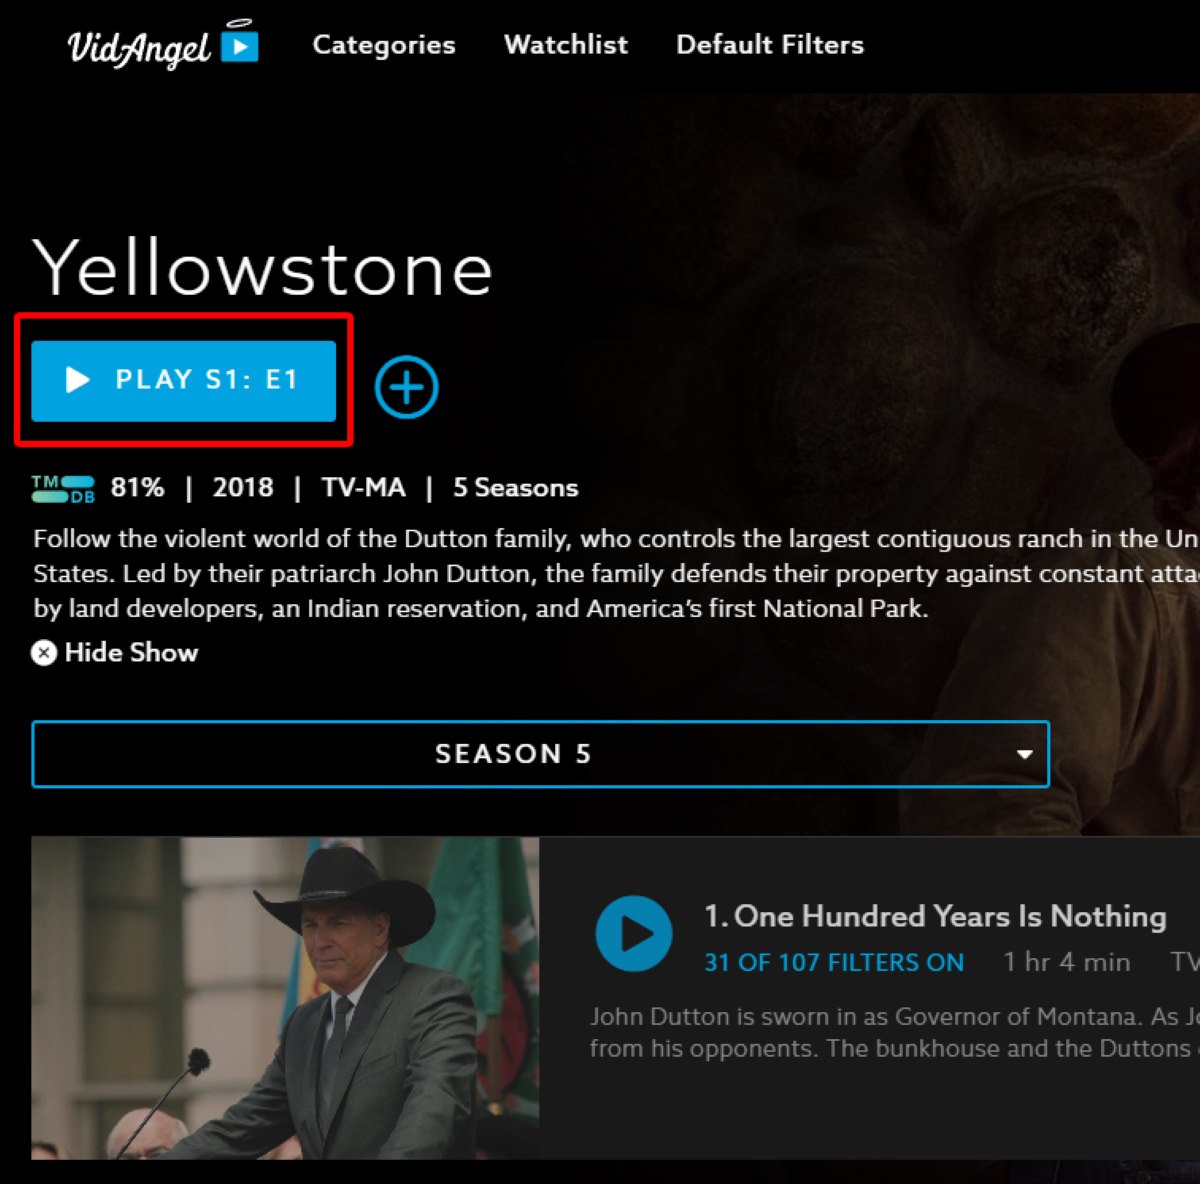 highlighted Play button to watch the Yellowstone episode on VidAngel